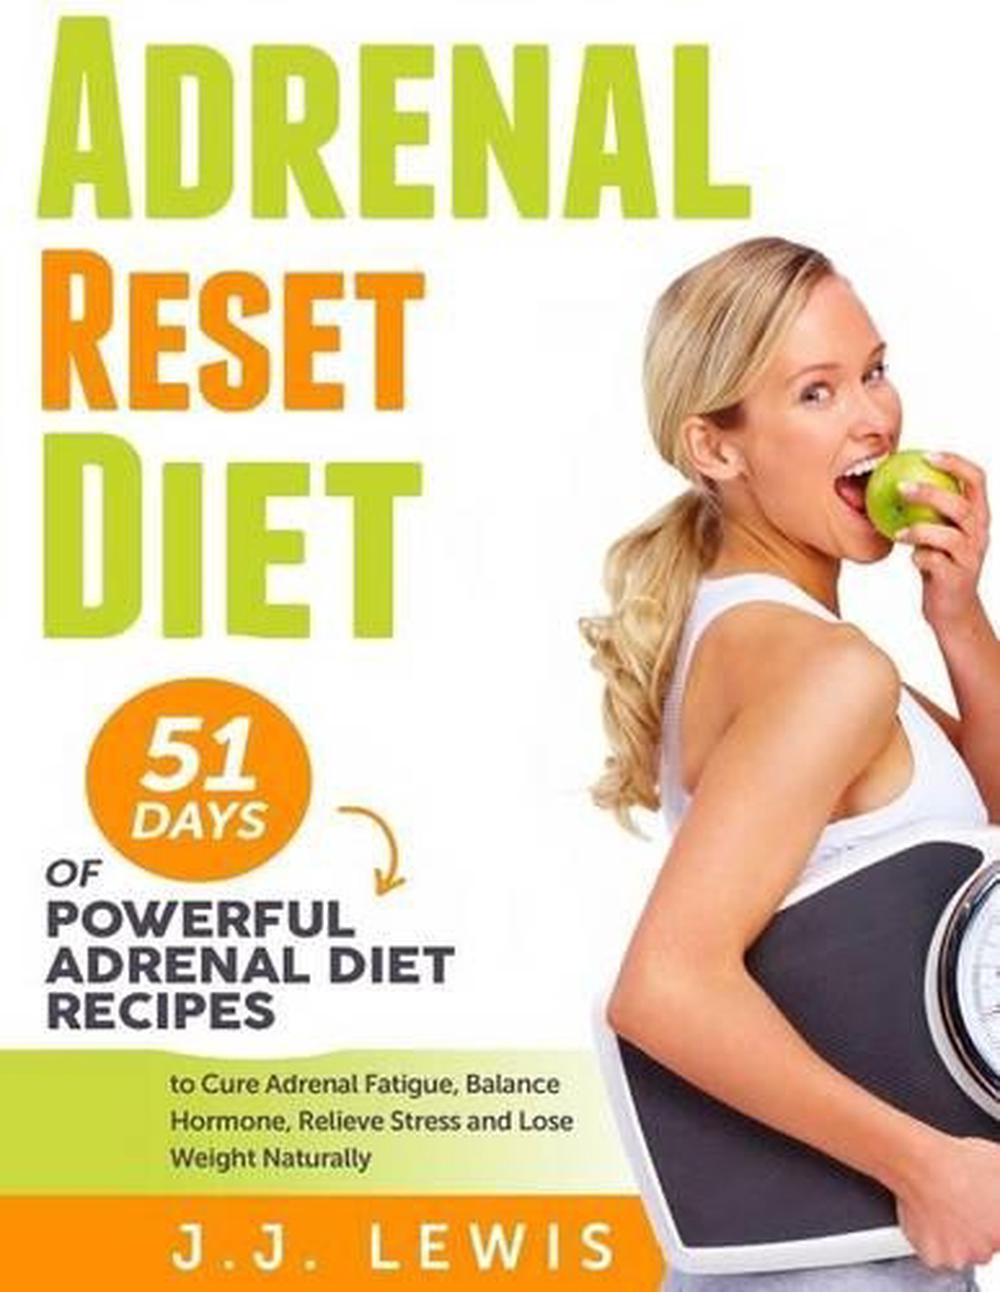 Adrenal Reset Diet 51 Days Of Powerful Adrenal Diet Recipes To Cure Adrenal Fat 9781514716519